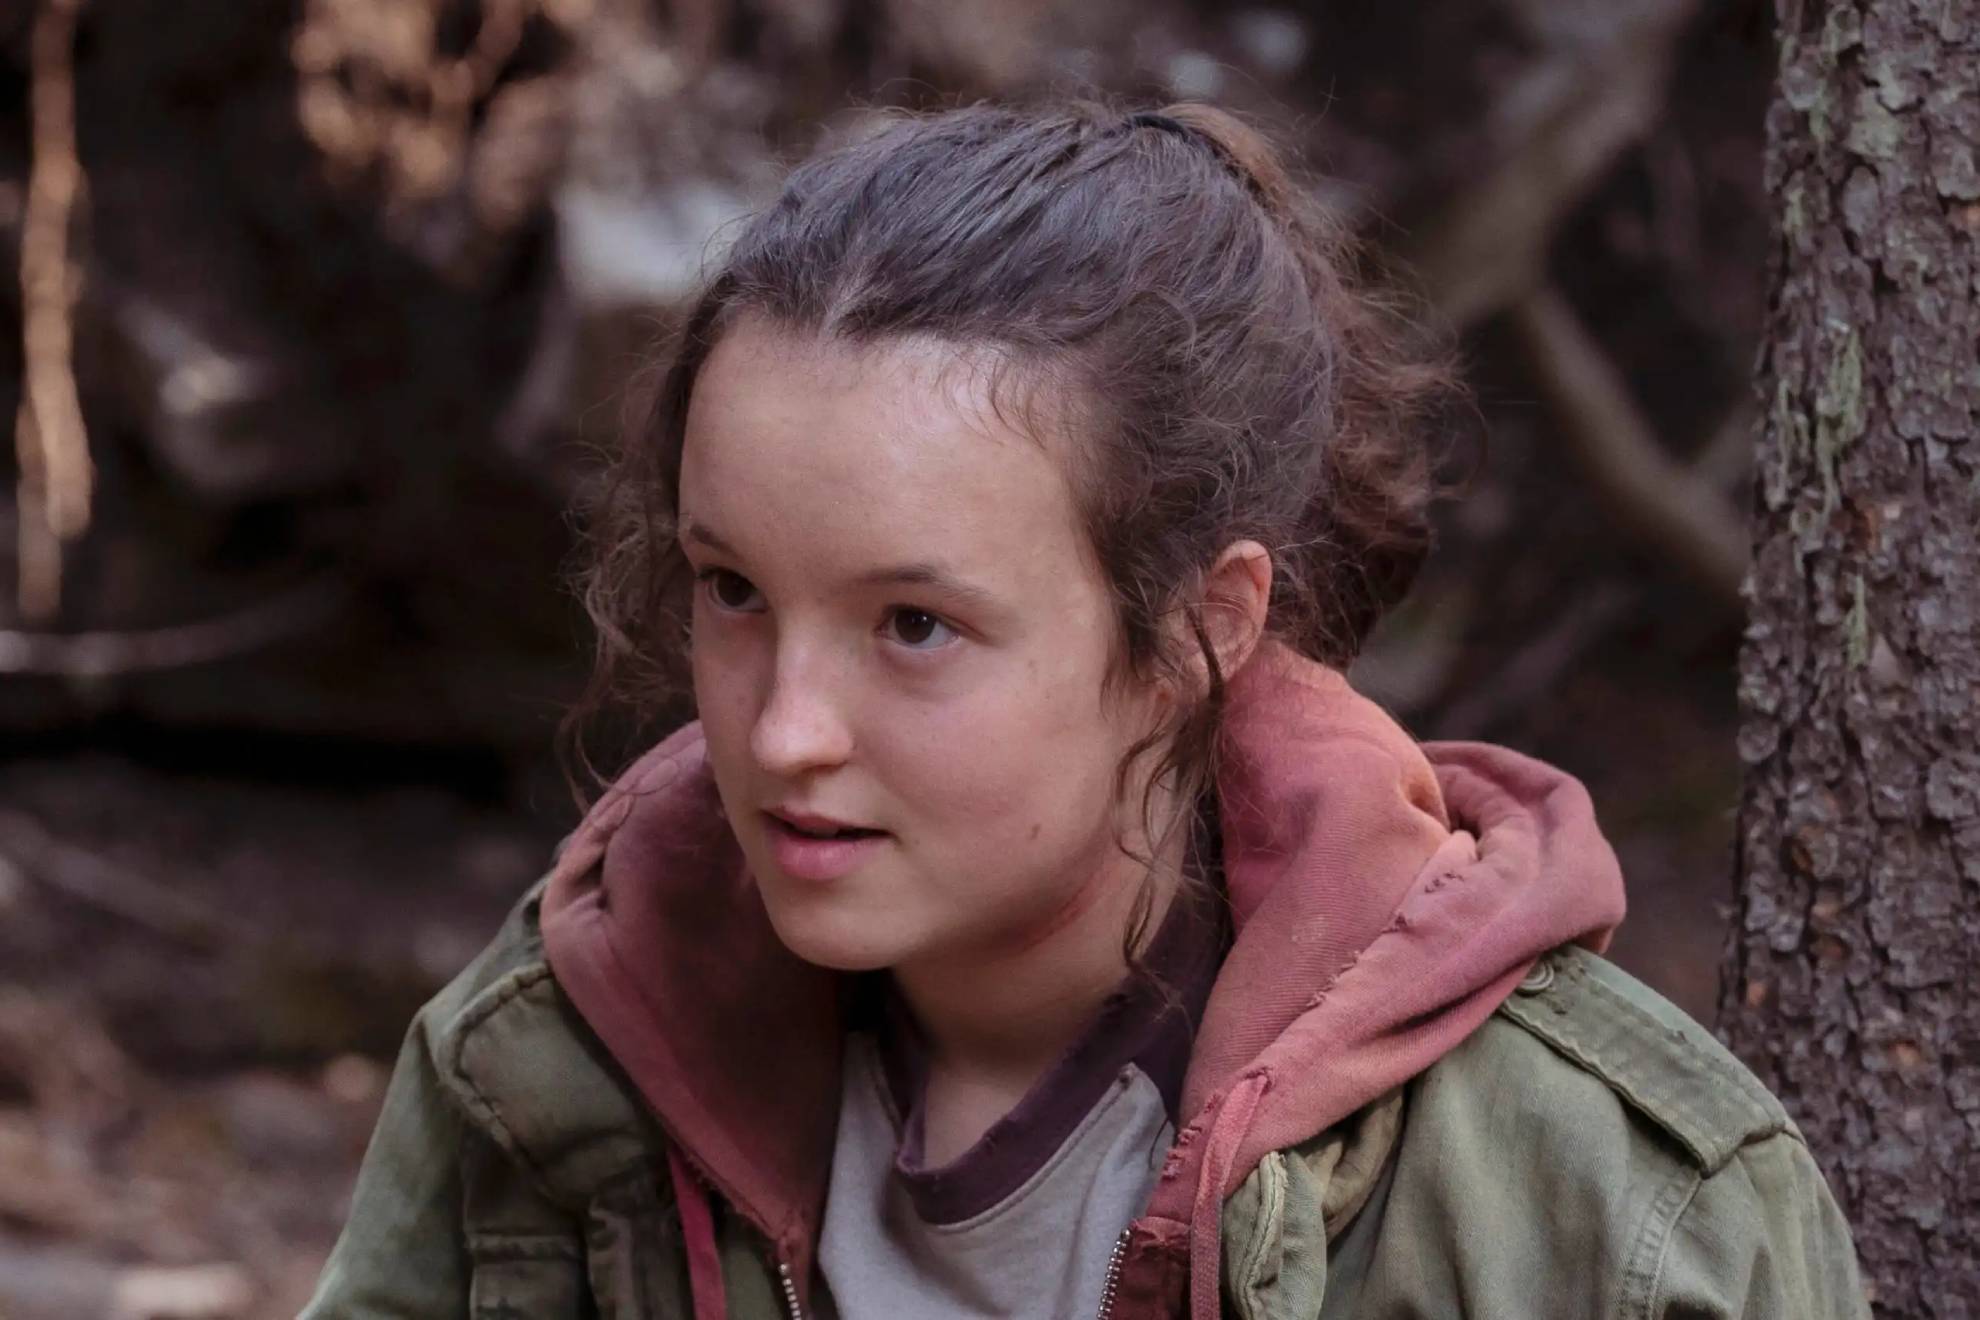 Bella Ramsey reveals possible start date for filming of 'The Last of Us' season 2